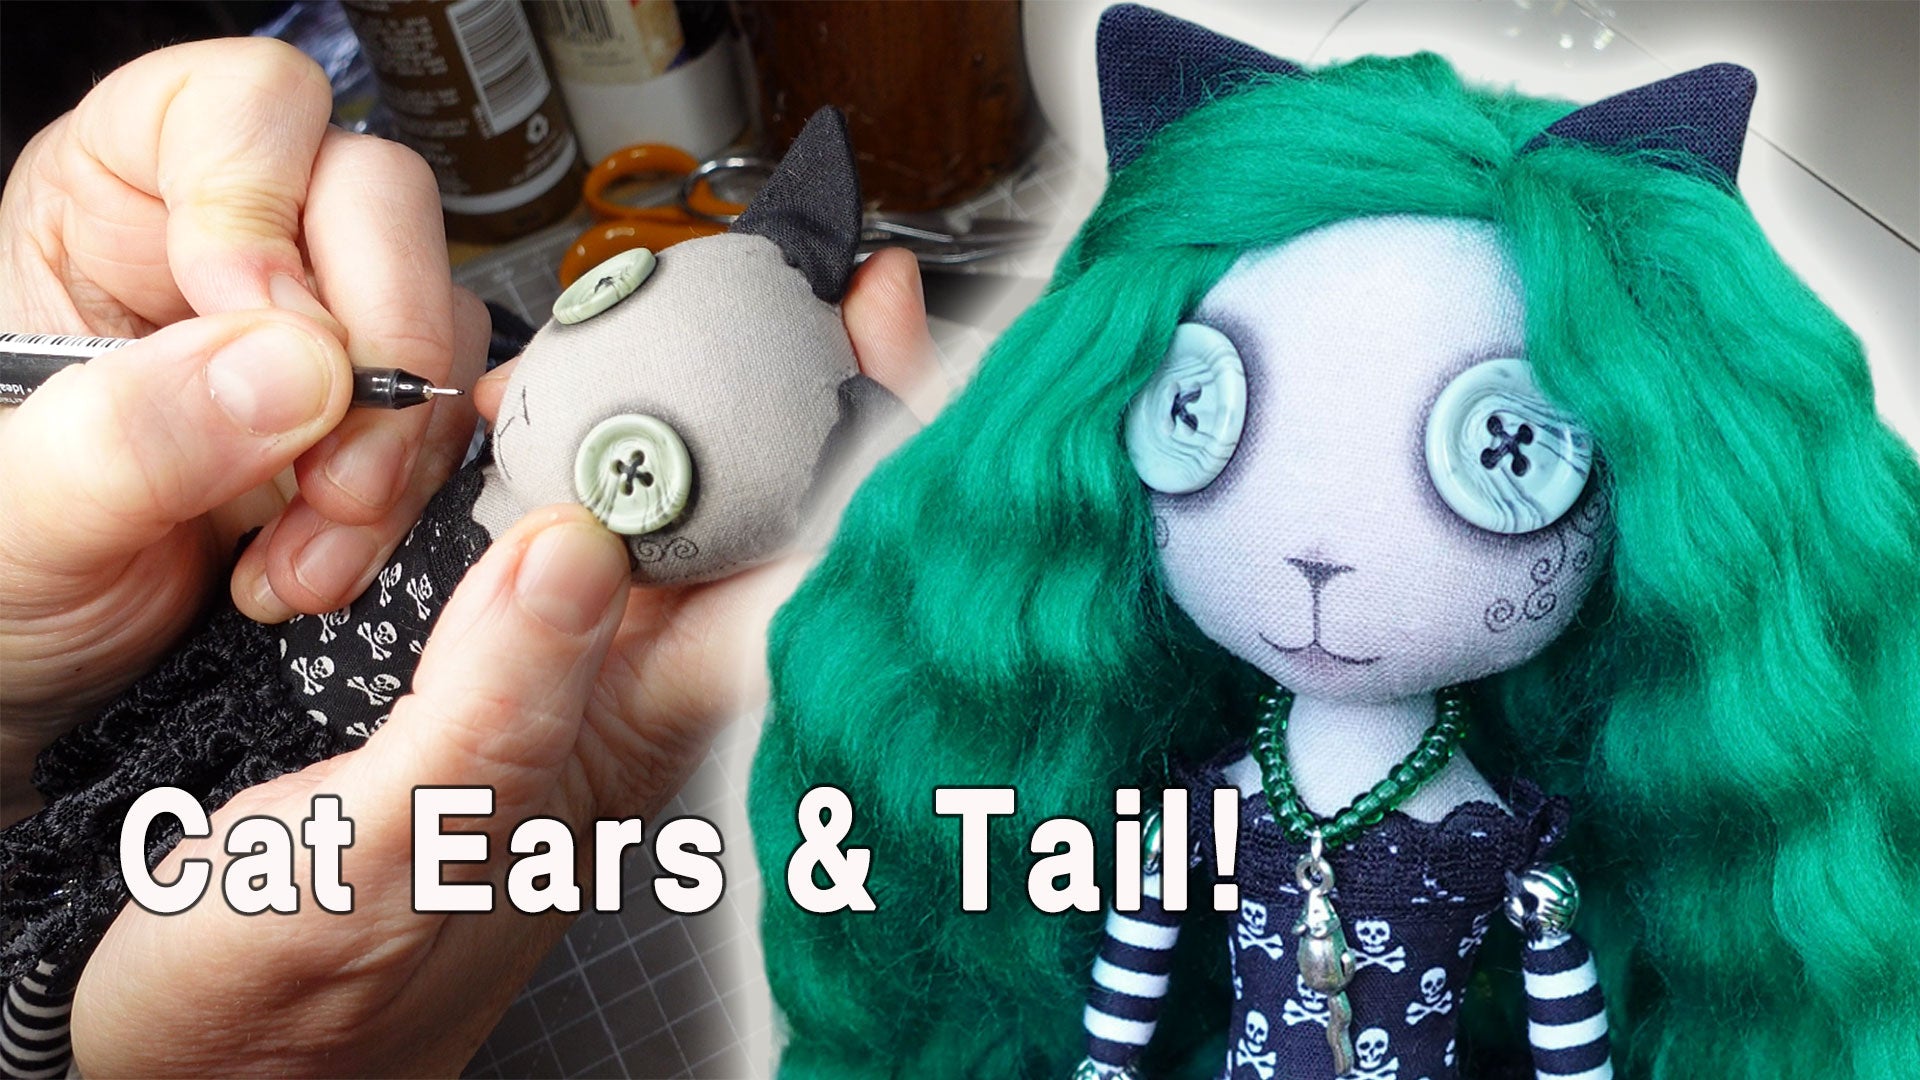 Load video: How I made a cat girl art doll